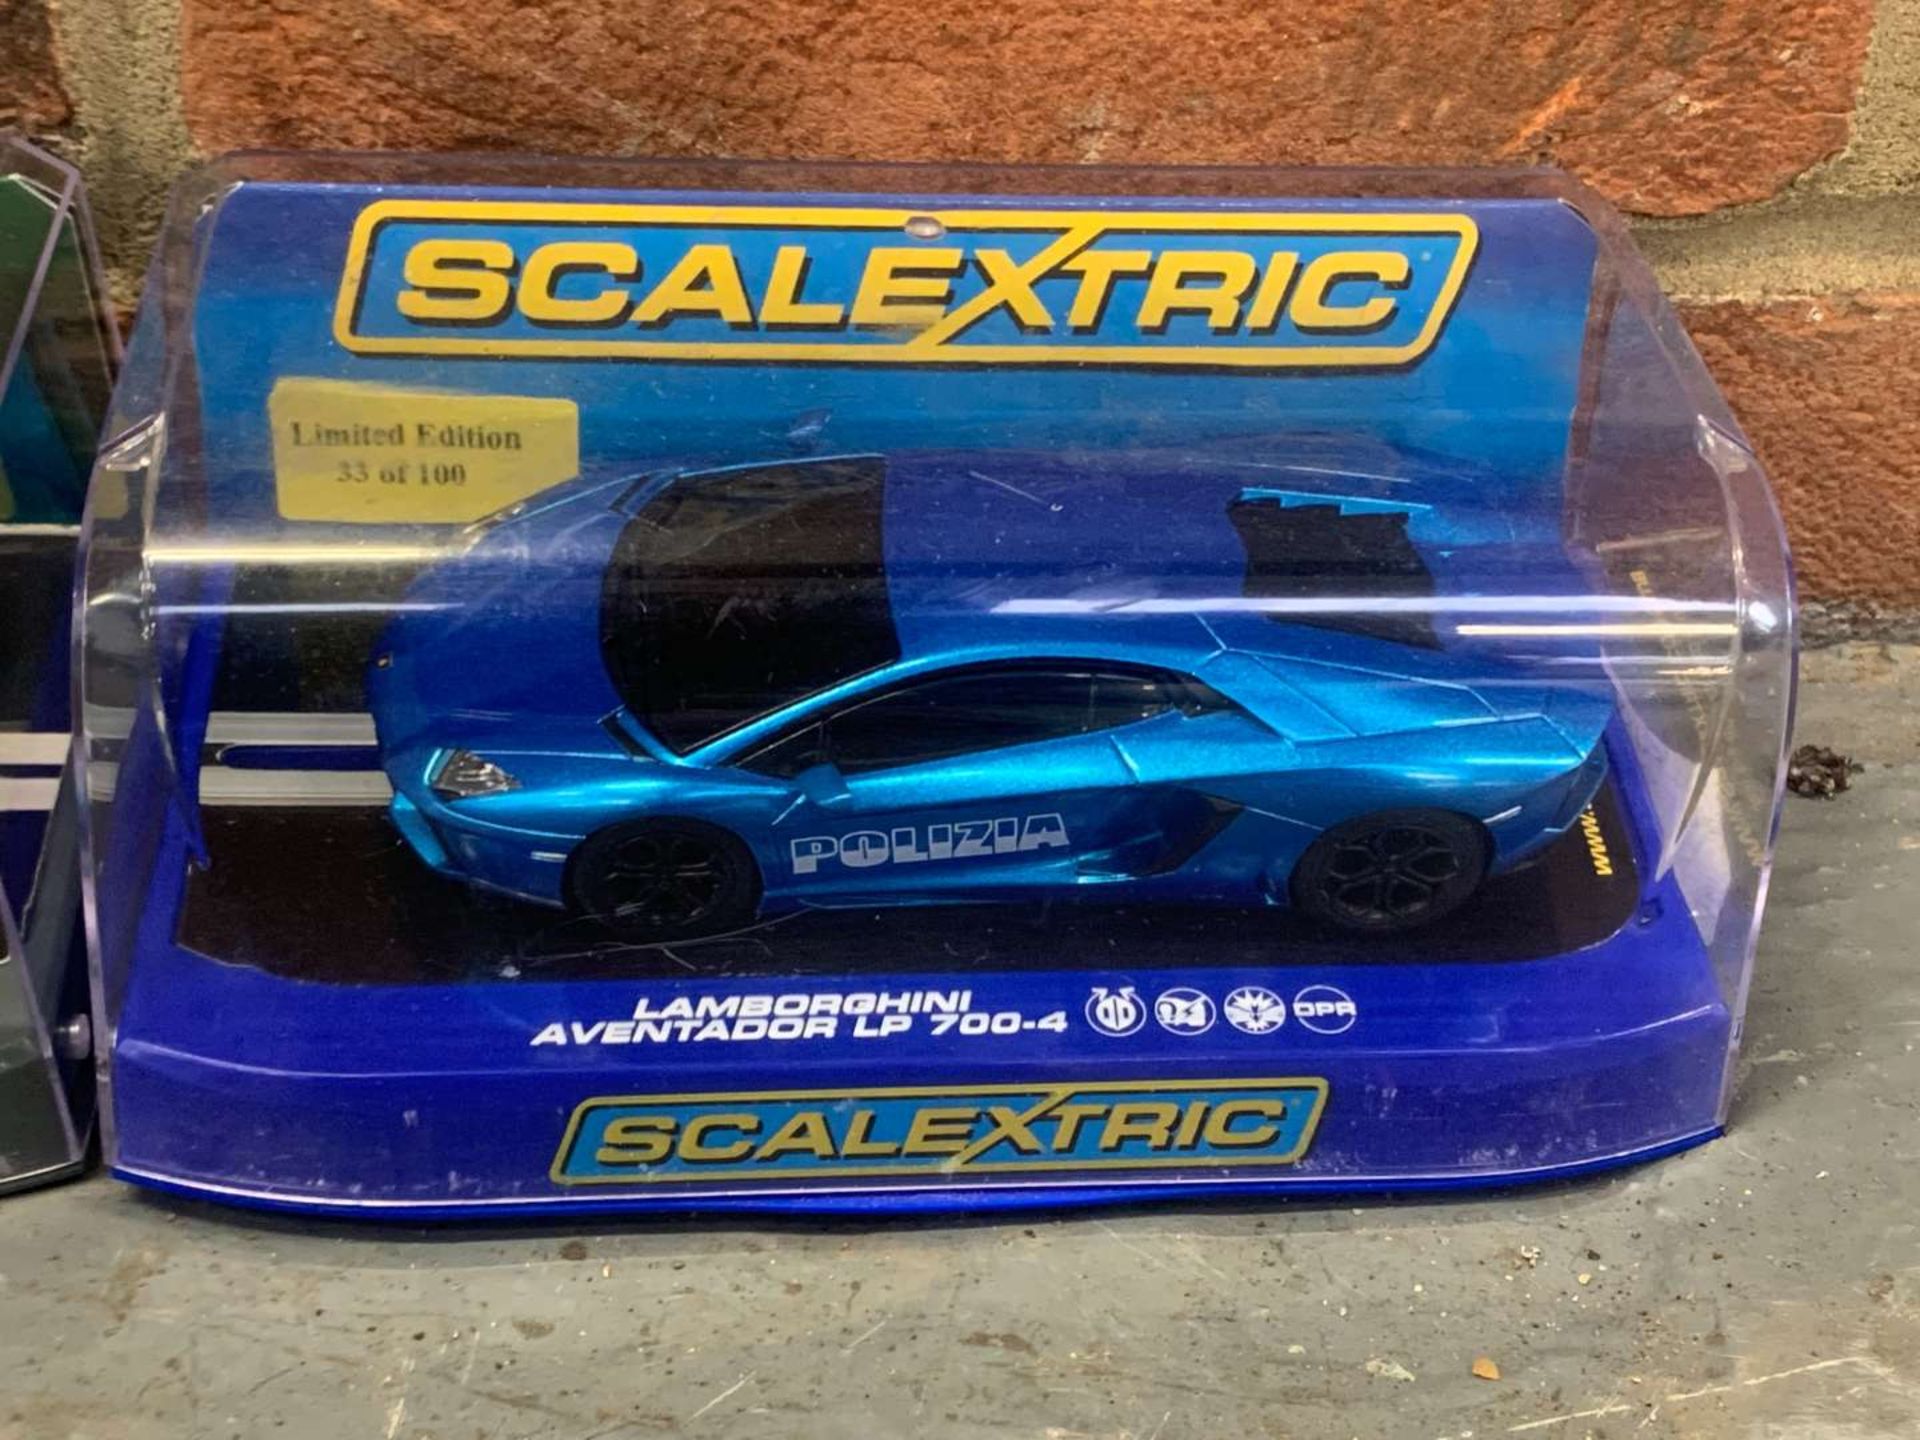 Boxed Scalextric Ford Sierra RS500 and Lamborghini Aventador Cars - Image 2 of 3